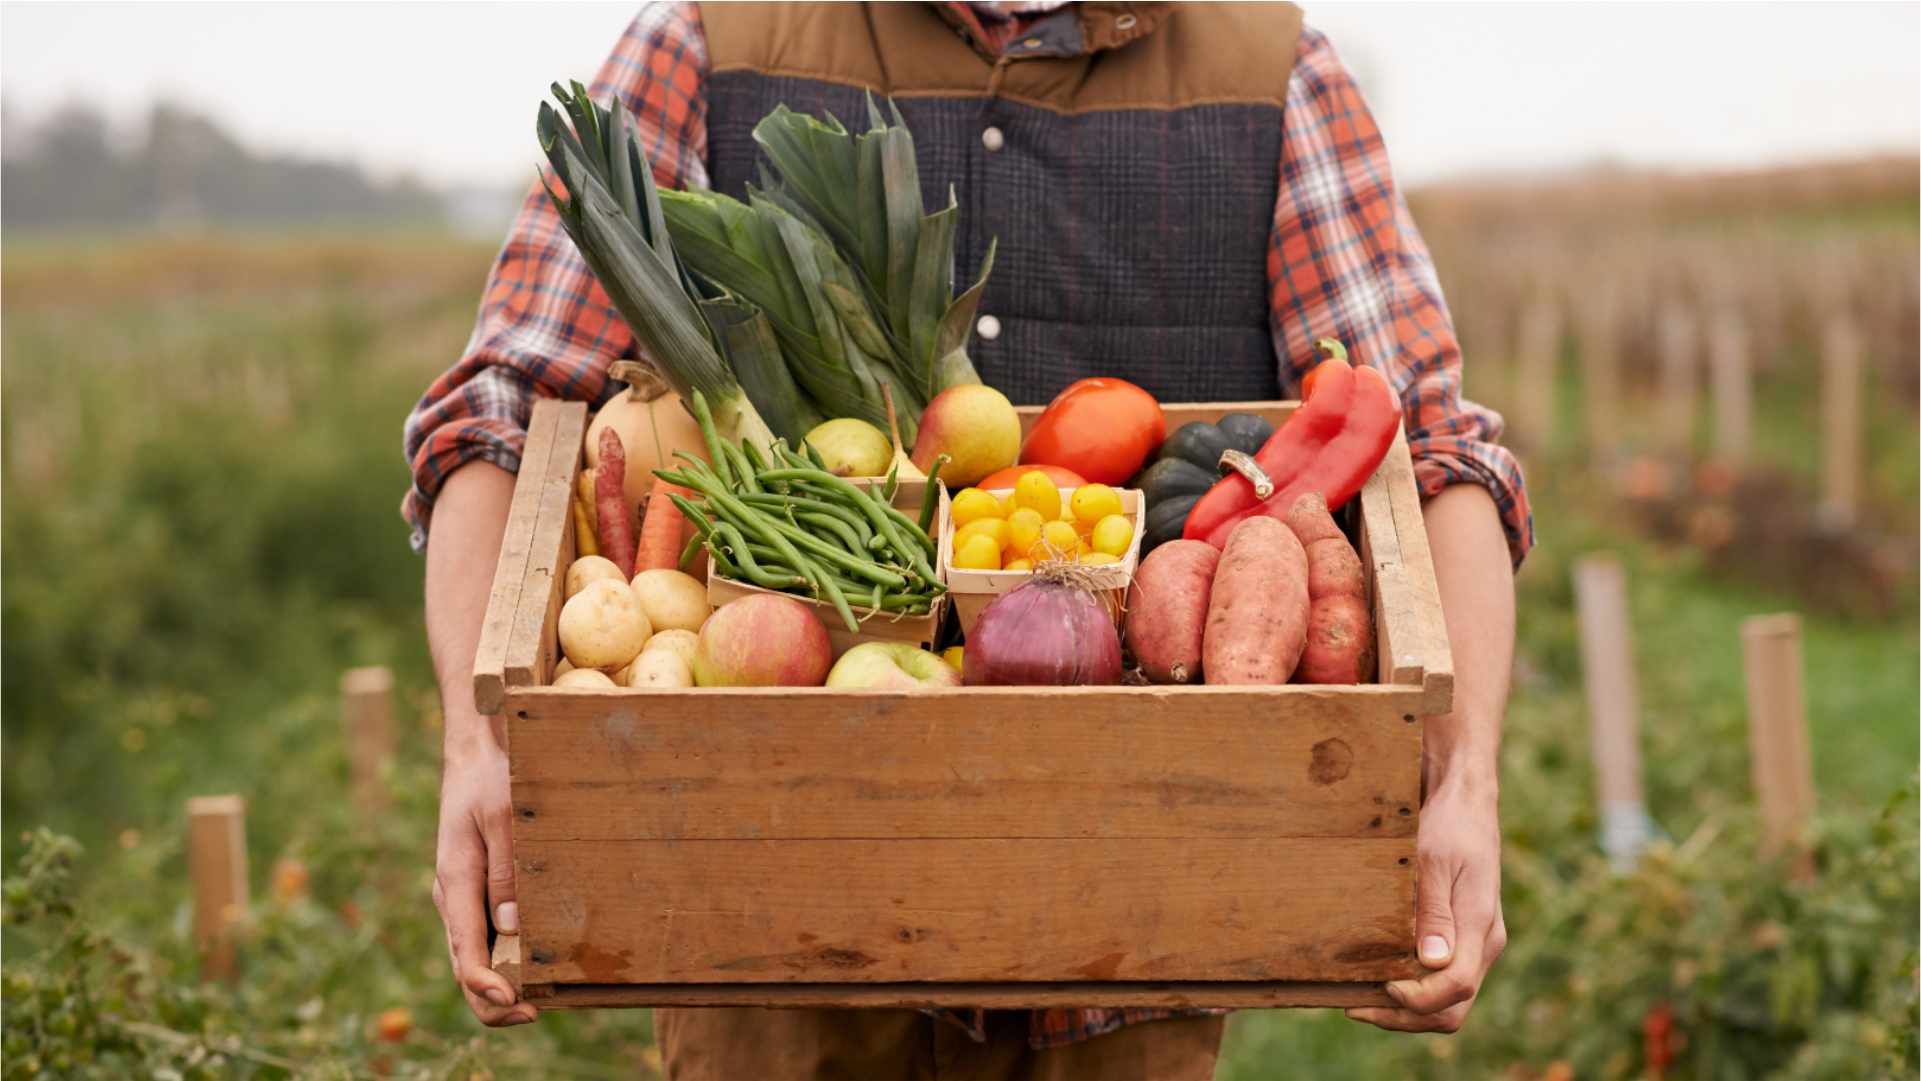 Image - CSA Network UK - Finding your mission - Veg box